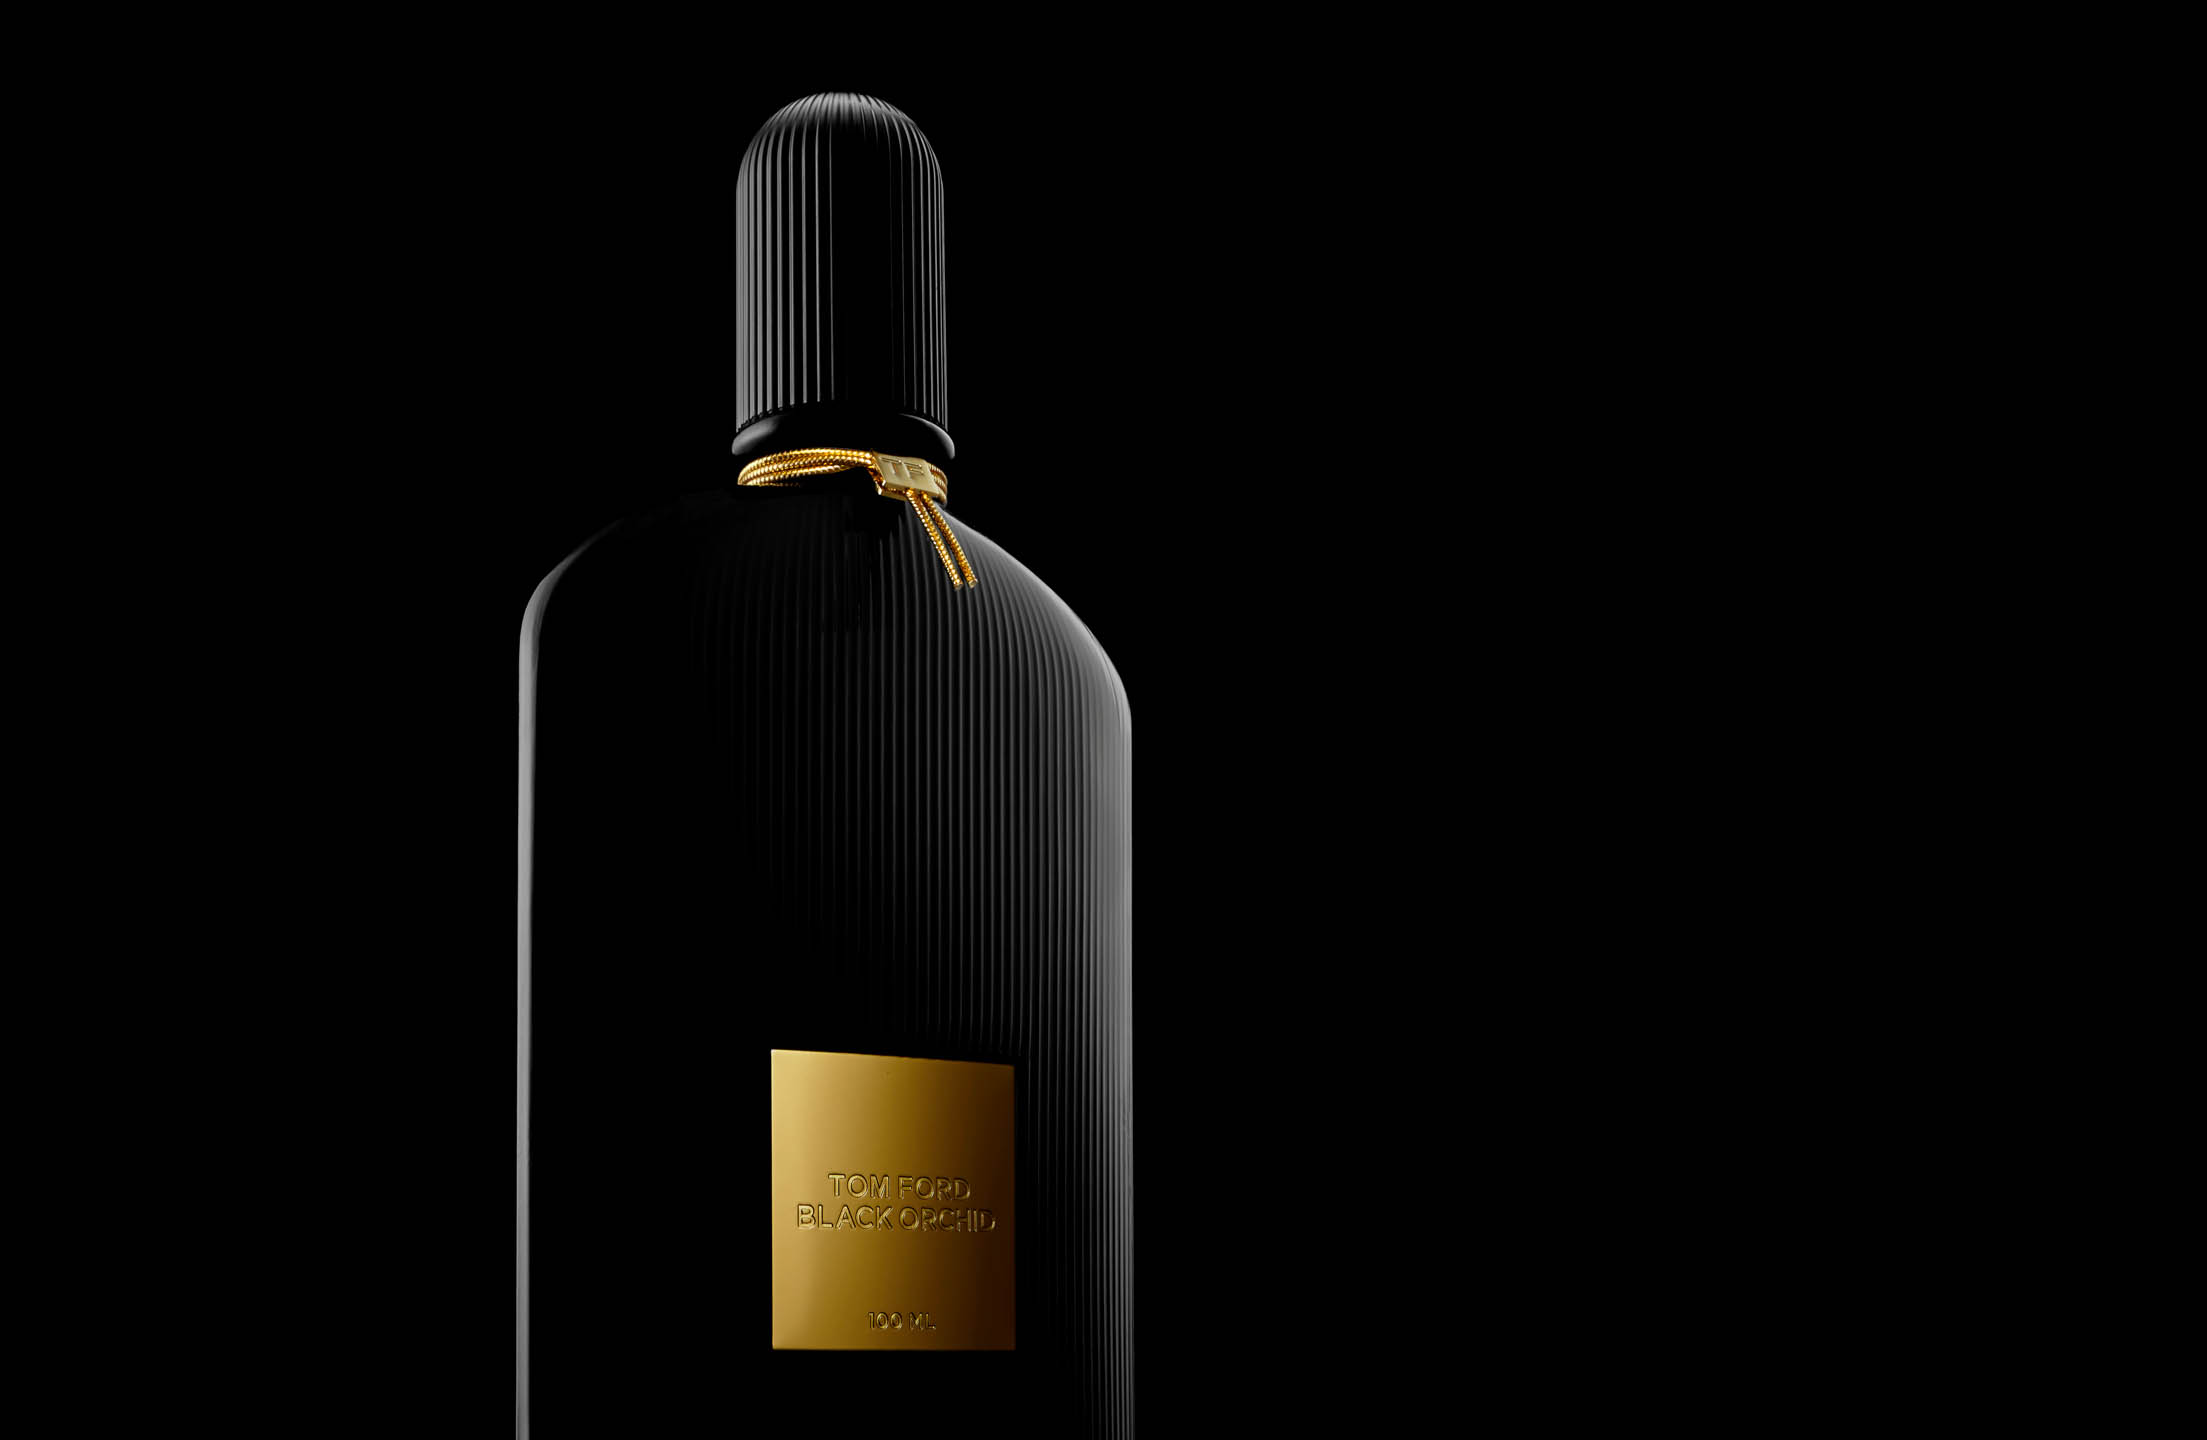 Tom Ford Black Orchid cologne